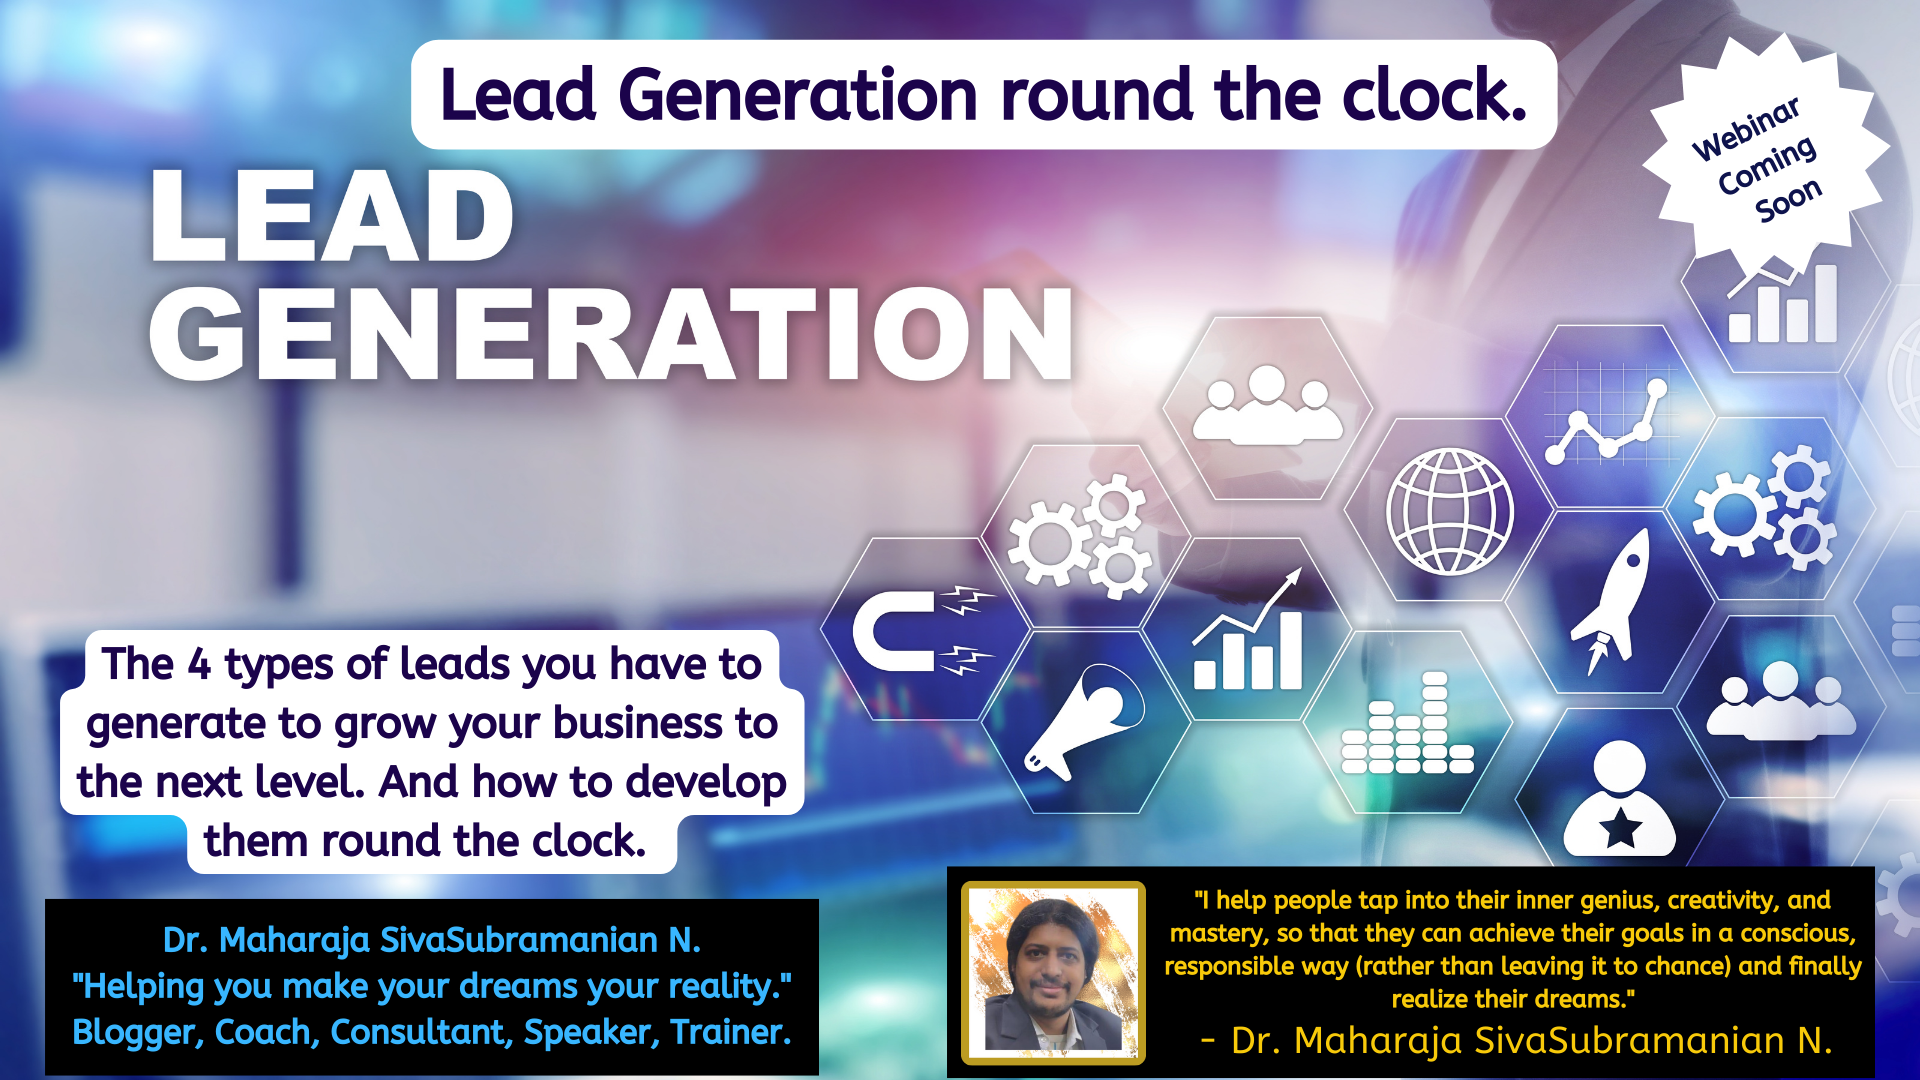 Lead Generation round the clock for Coaches and Consultants. – Upcoming free webinar.